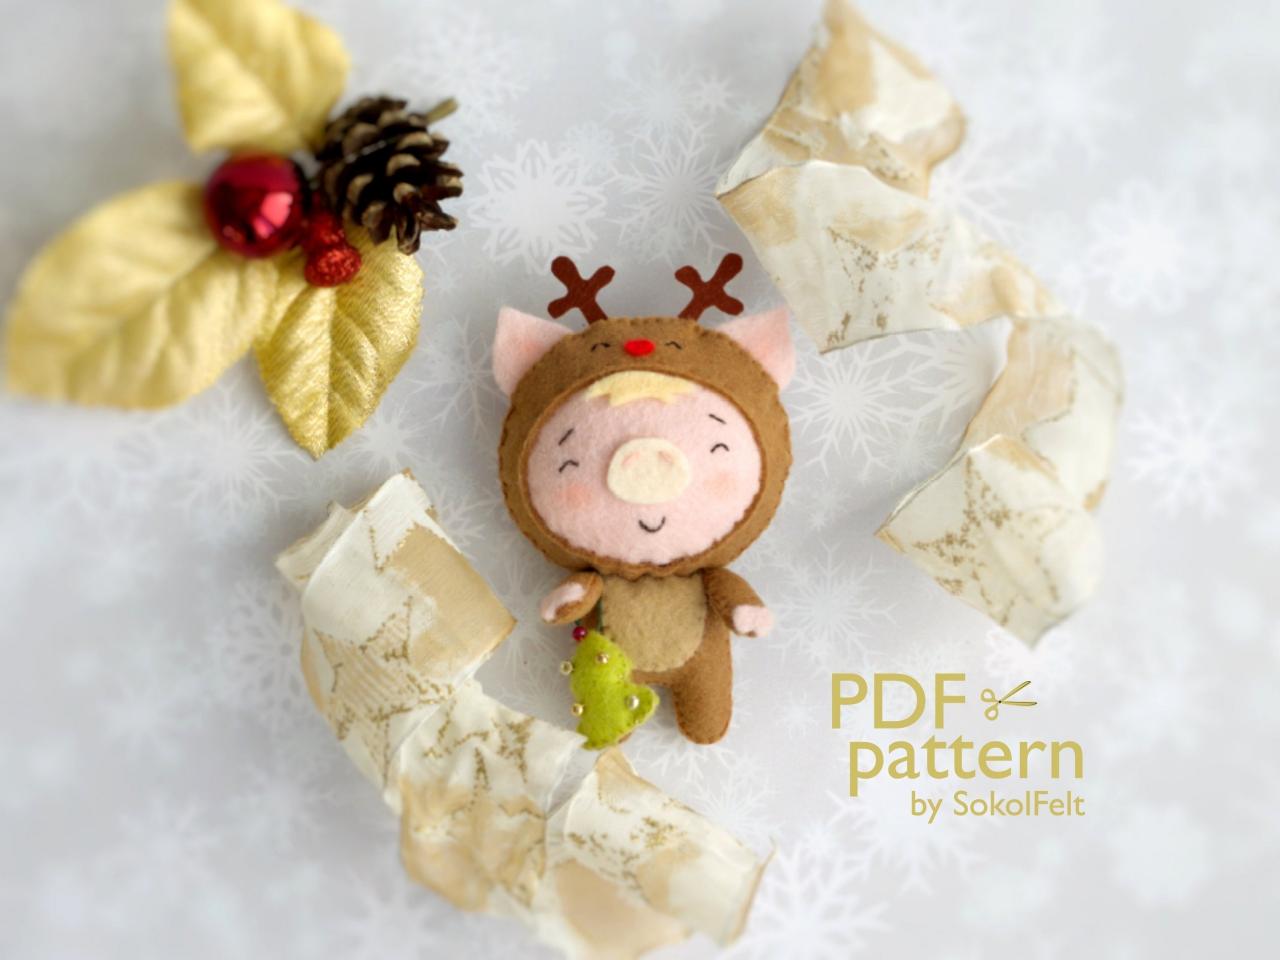 Christmas Pig Toy Sewing Pdf Pattern, Felt Christmas Piglet In A Deer Costume Ornament, Christmas Tree Toy, Baby Crib Mobile Toy